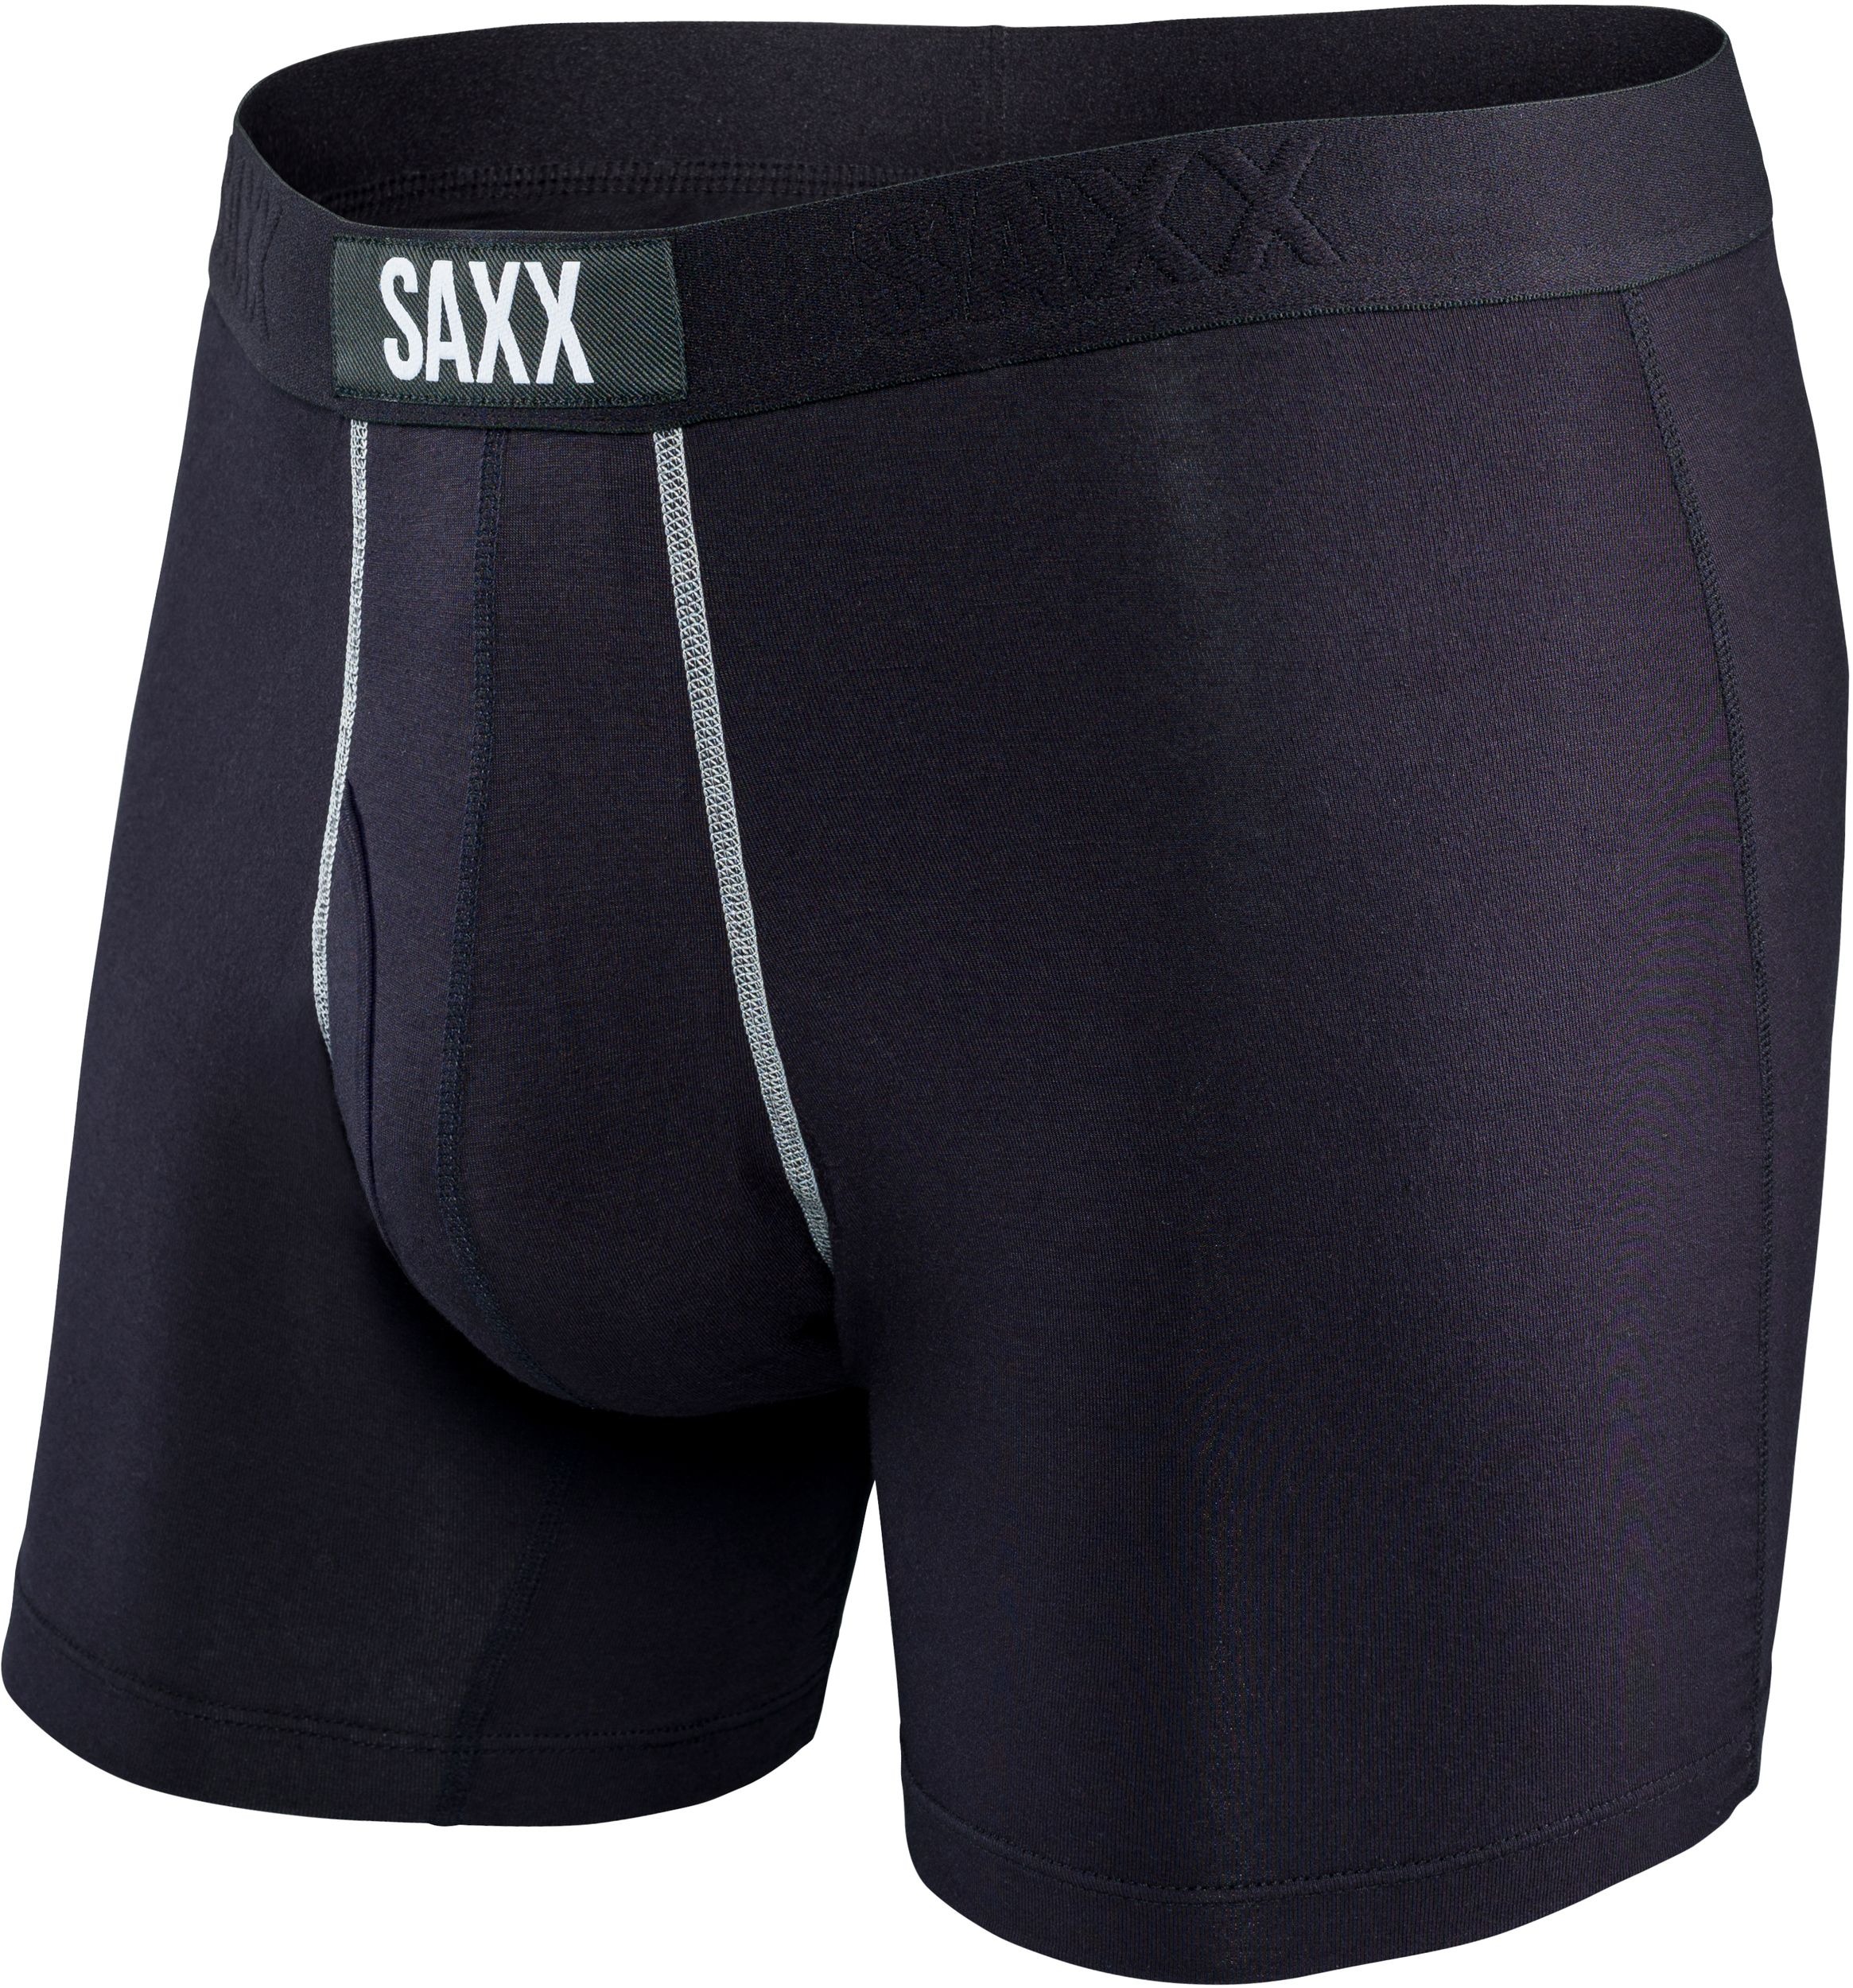 SAXX Ultra Men's Boxer Brief with Fly, Underwear, Breathable, Relaxed ...